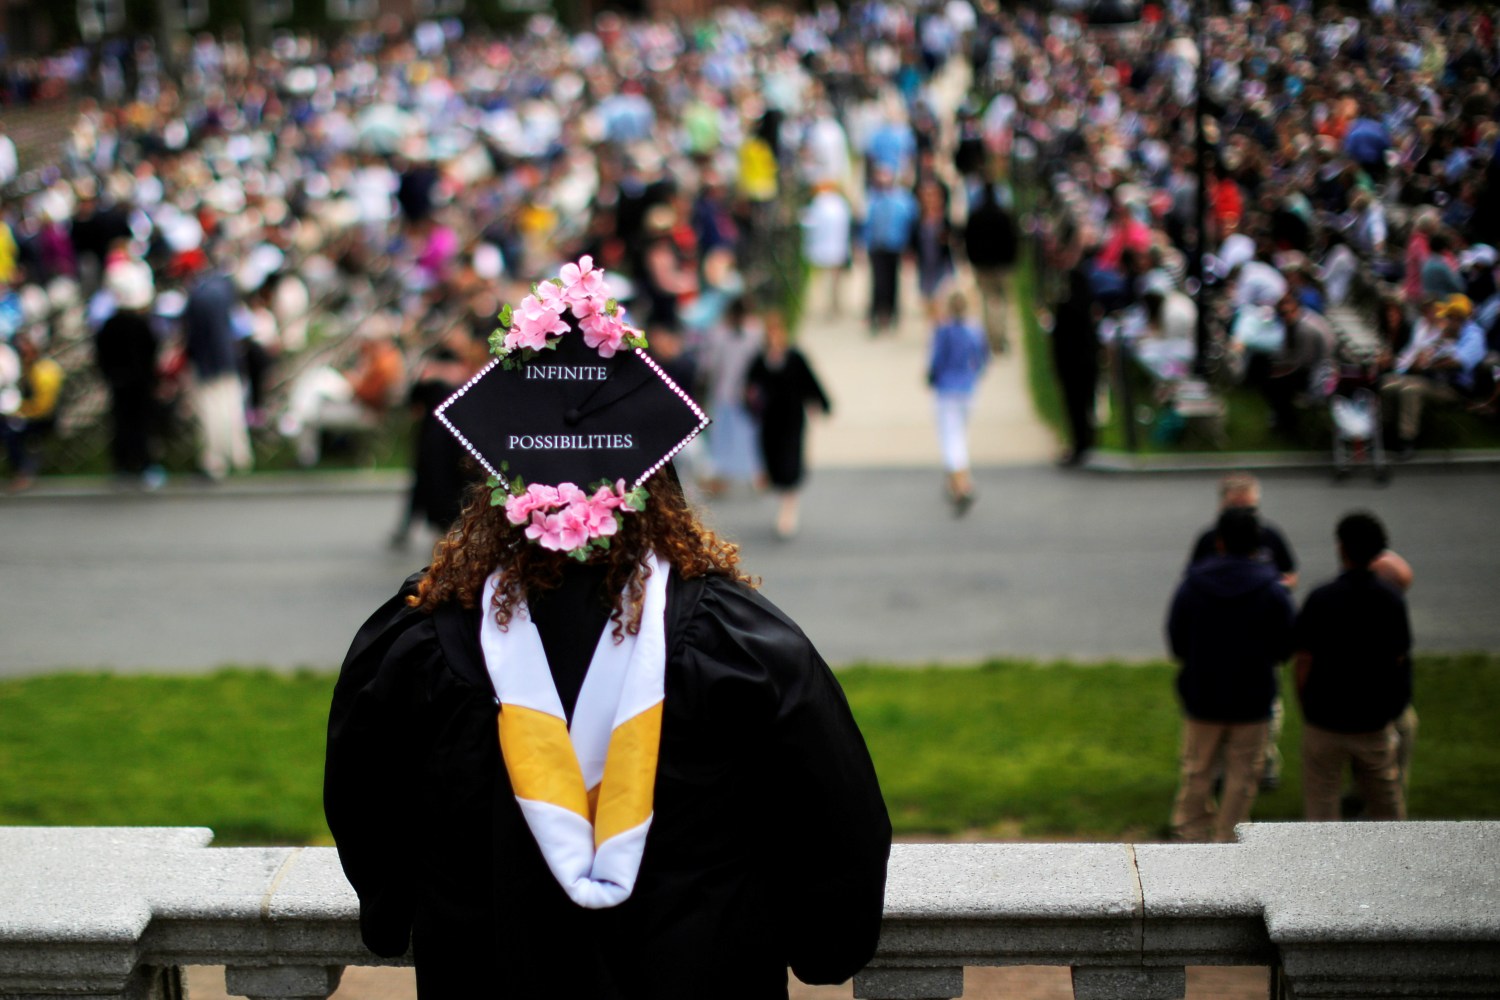 A senior with "Infinite Possibilities" written on her cap waits to graduate during Commencement at Smith College in Northampton, Massachusetts, U.S., May 21, 2017.